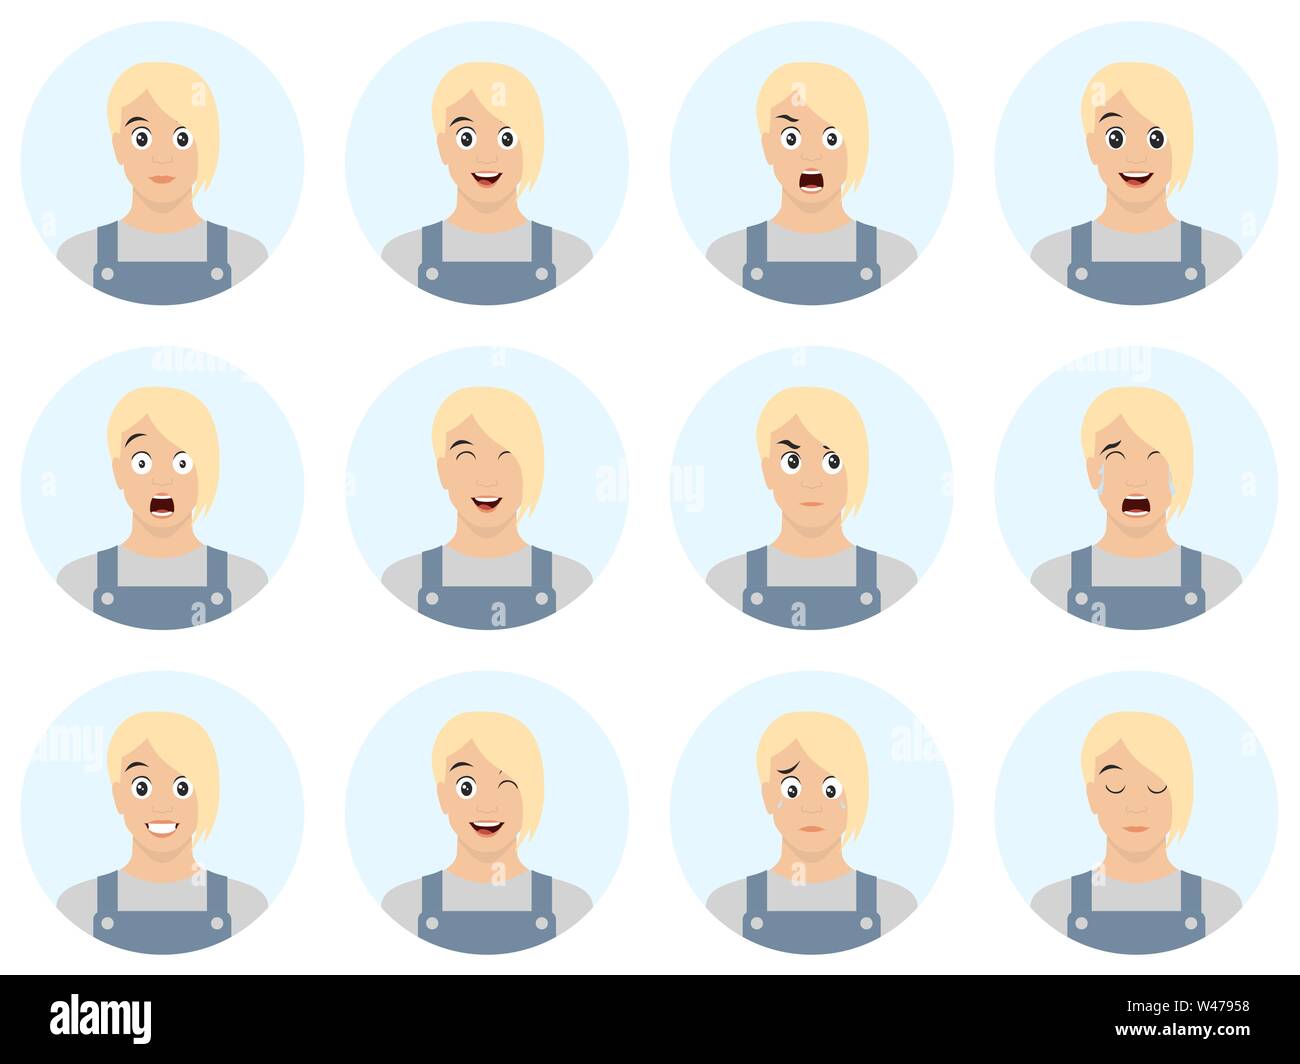 Set of male facial emotions. Handsome blond man emoji character with different expressions. Vector illustration in cartoon style. Avatar set. Stock Vector